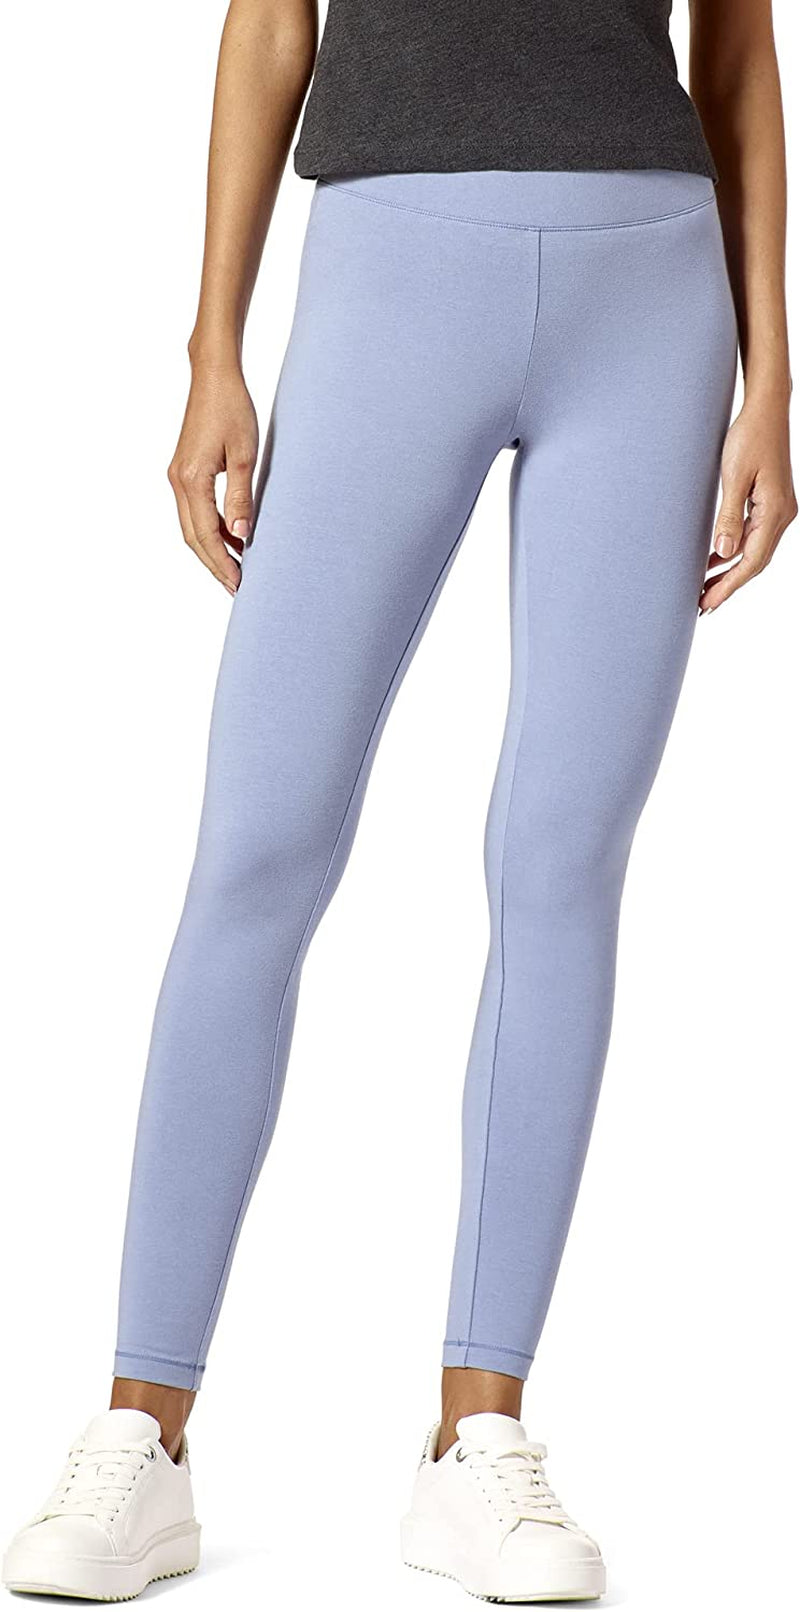 HUE Women'S Cotton Ultra Legging with Wide Waistband, Assorted